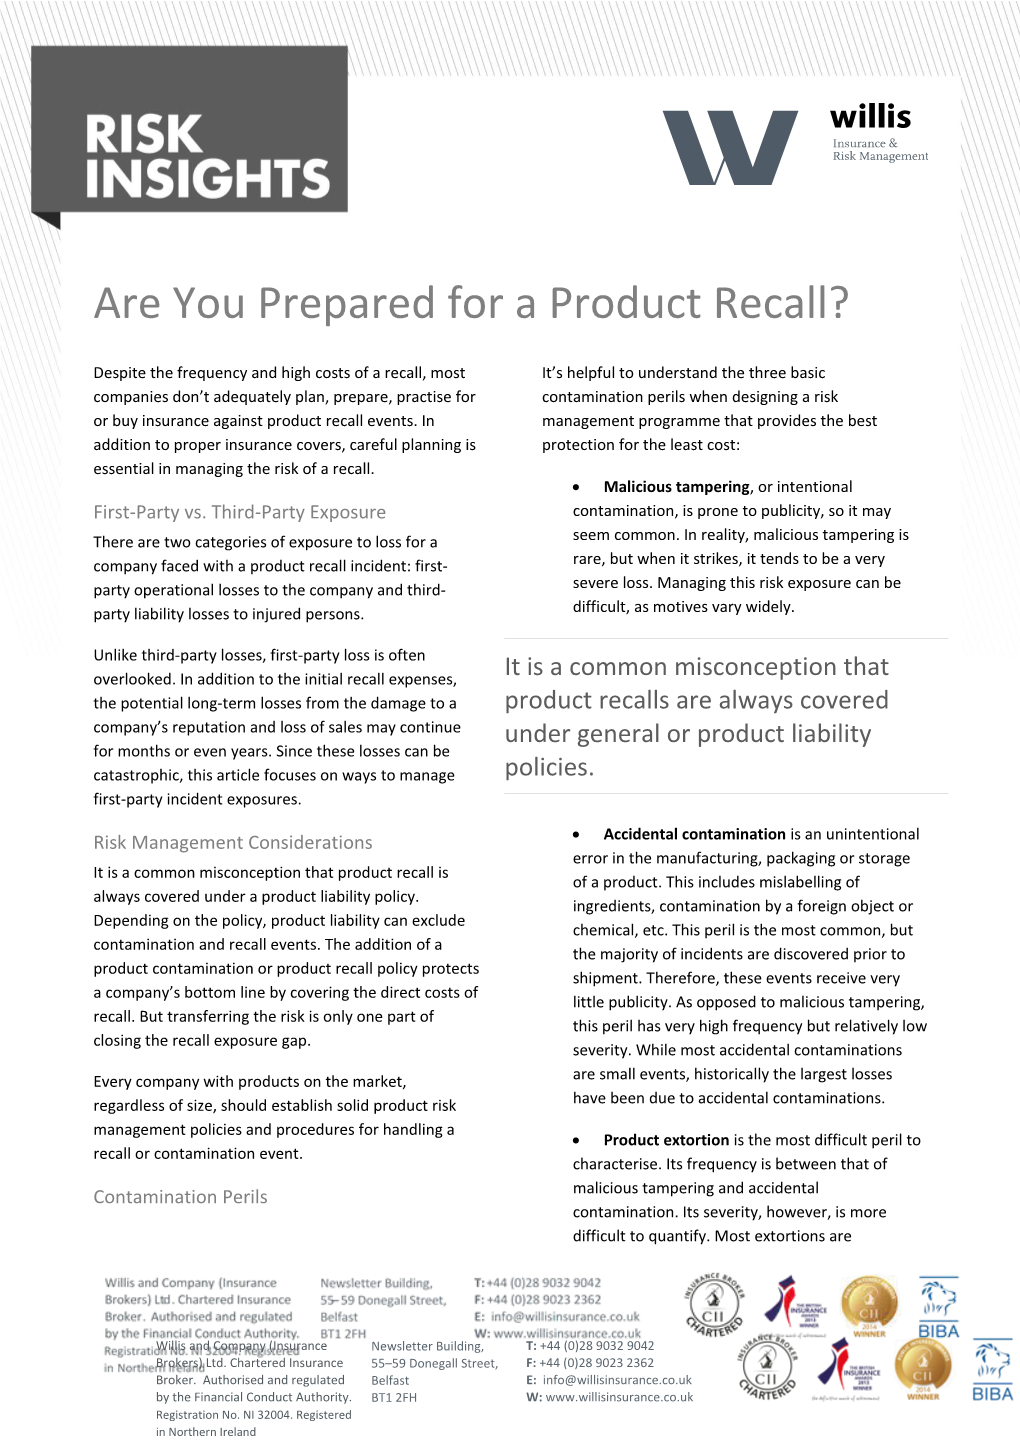 Are You Prepared for a Product Recall?